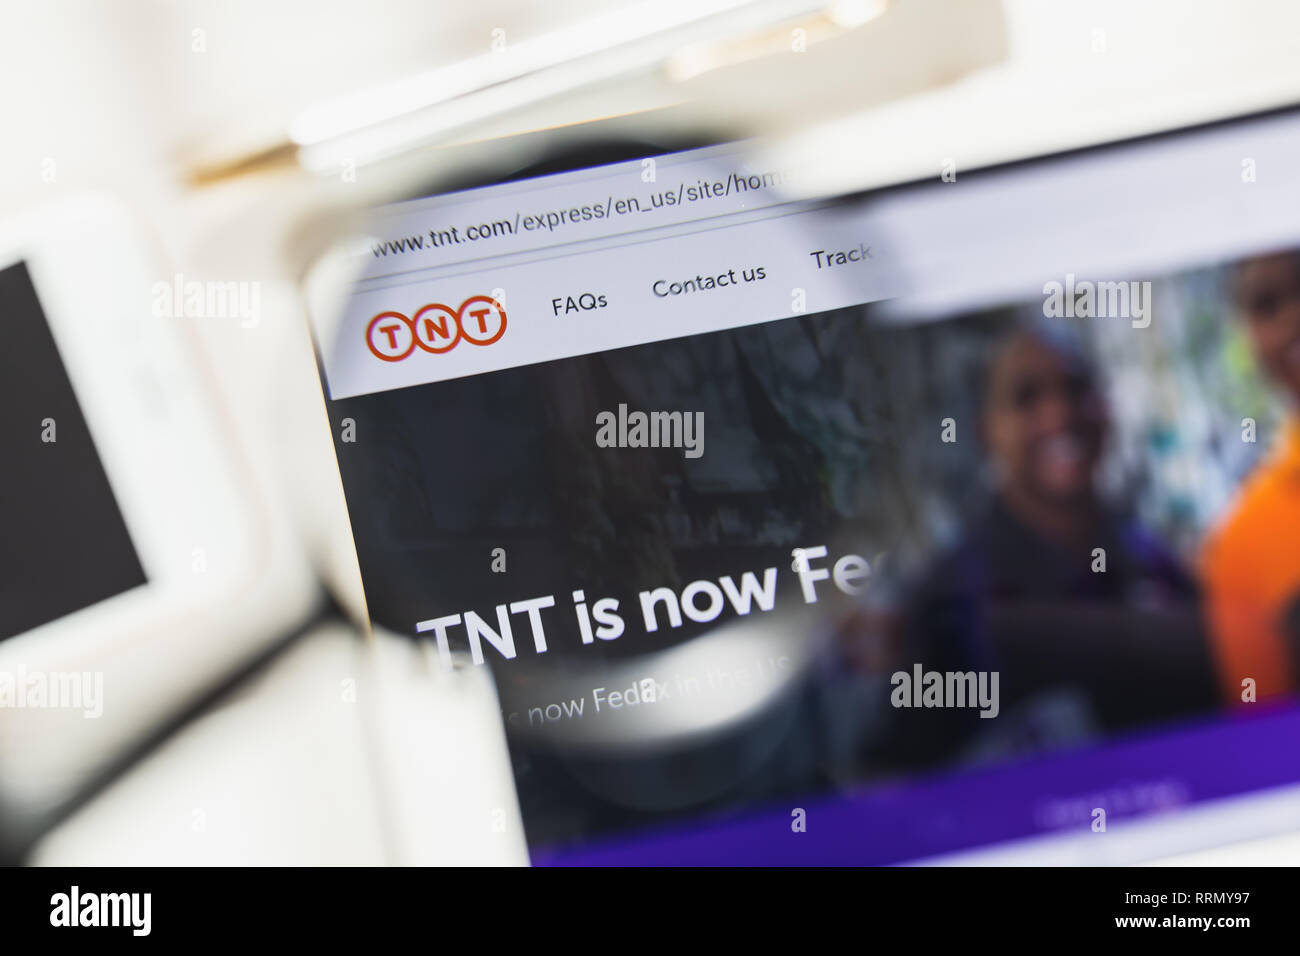 Washington, D.C., USA - 27 February 2019: TNT Express official website homepage under magnifying glass. Concept Moody's Corporation logo visible Stock Photo